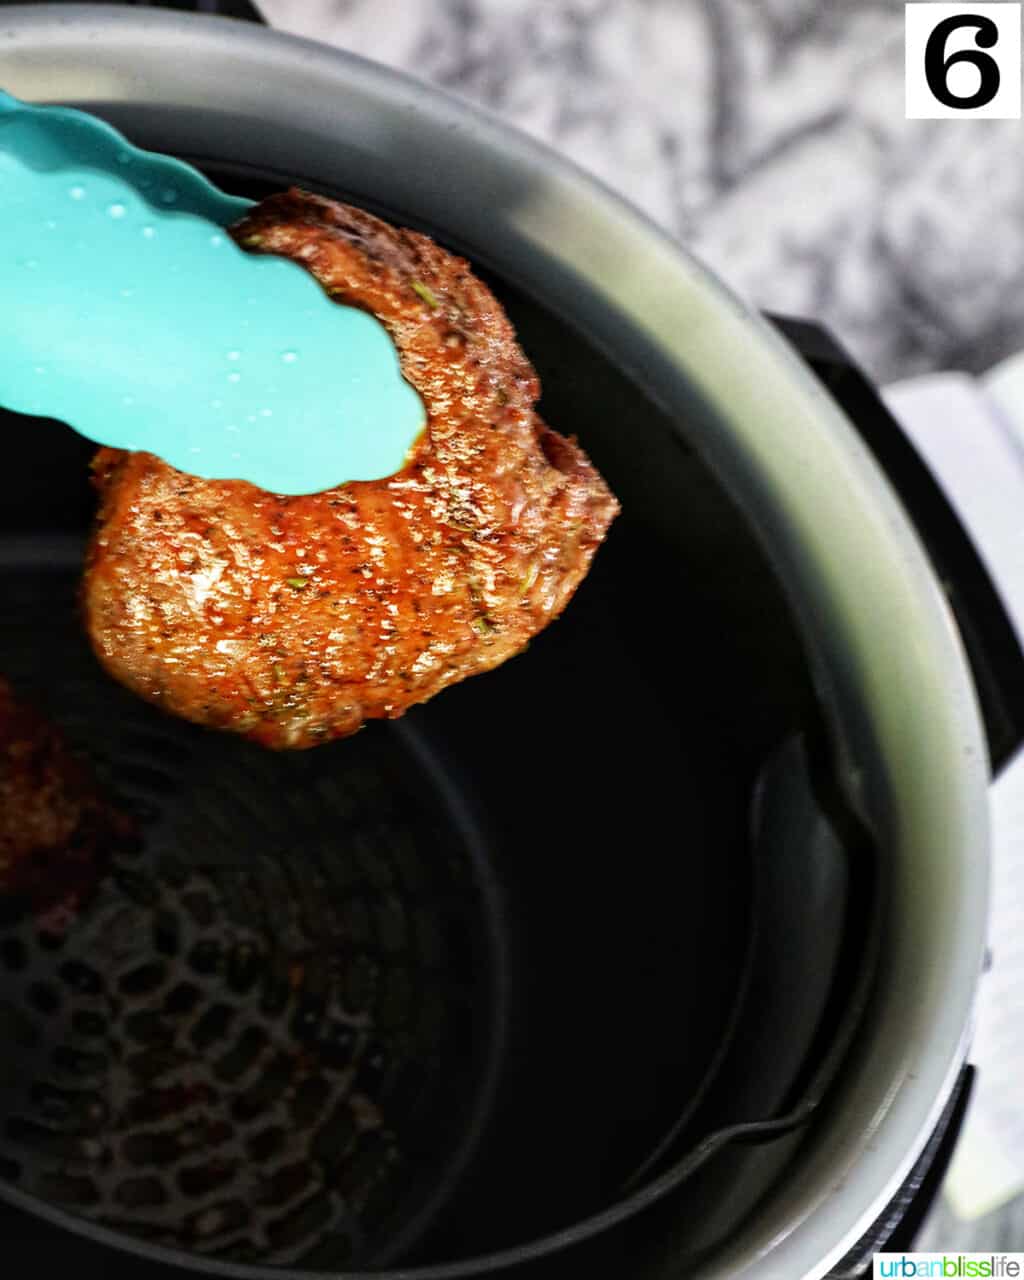 blue tongs holding up a half-cooked filet mignon over an air fryer.